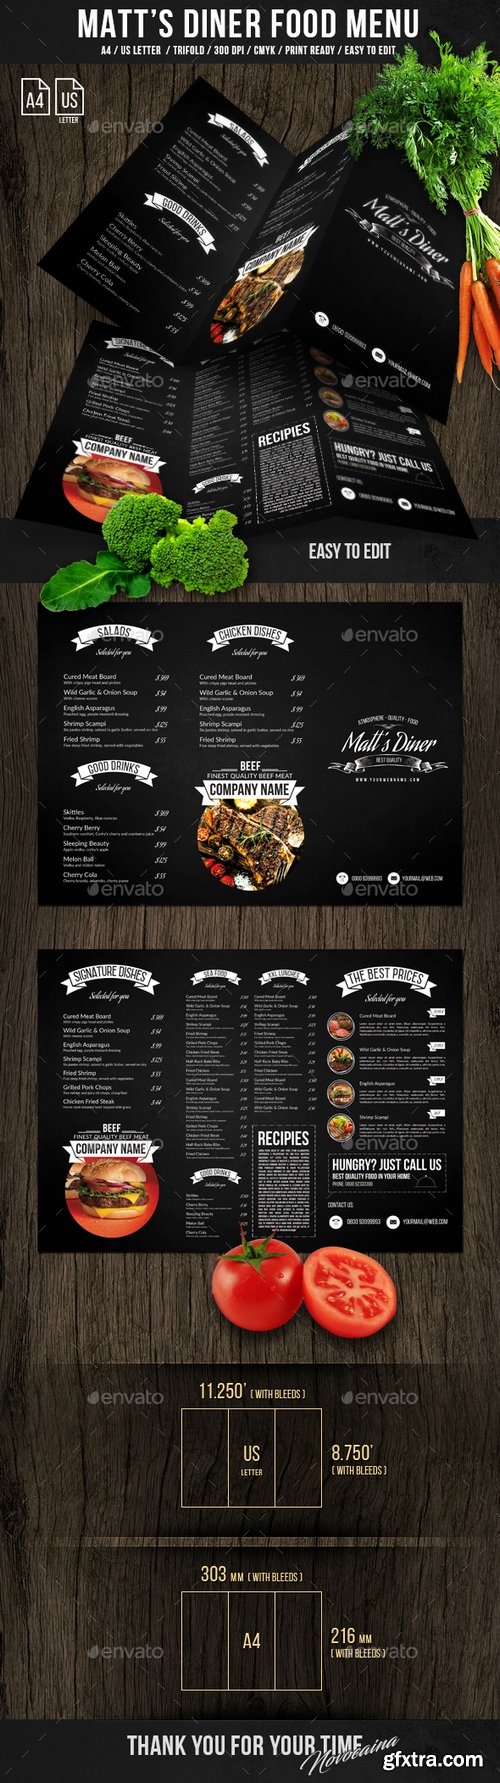 Graphicriver - Matt\'s Diner Trifold A4 and US Letter Menu 21245528